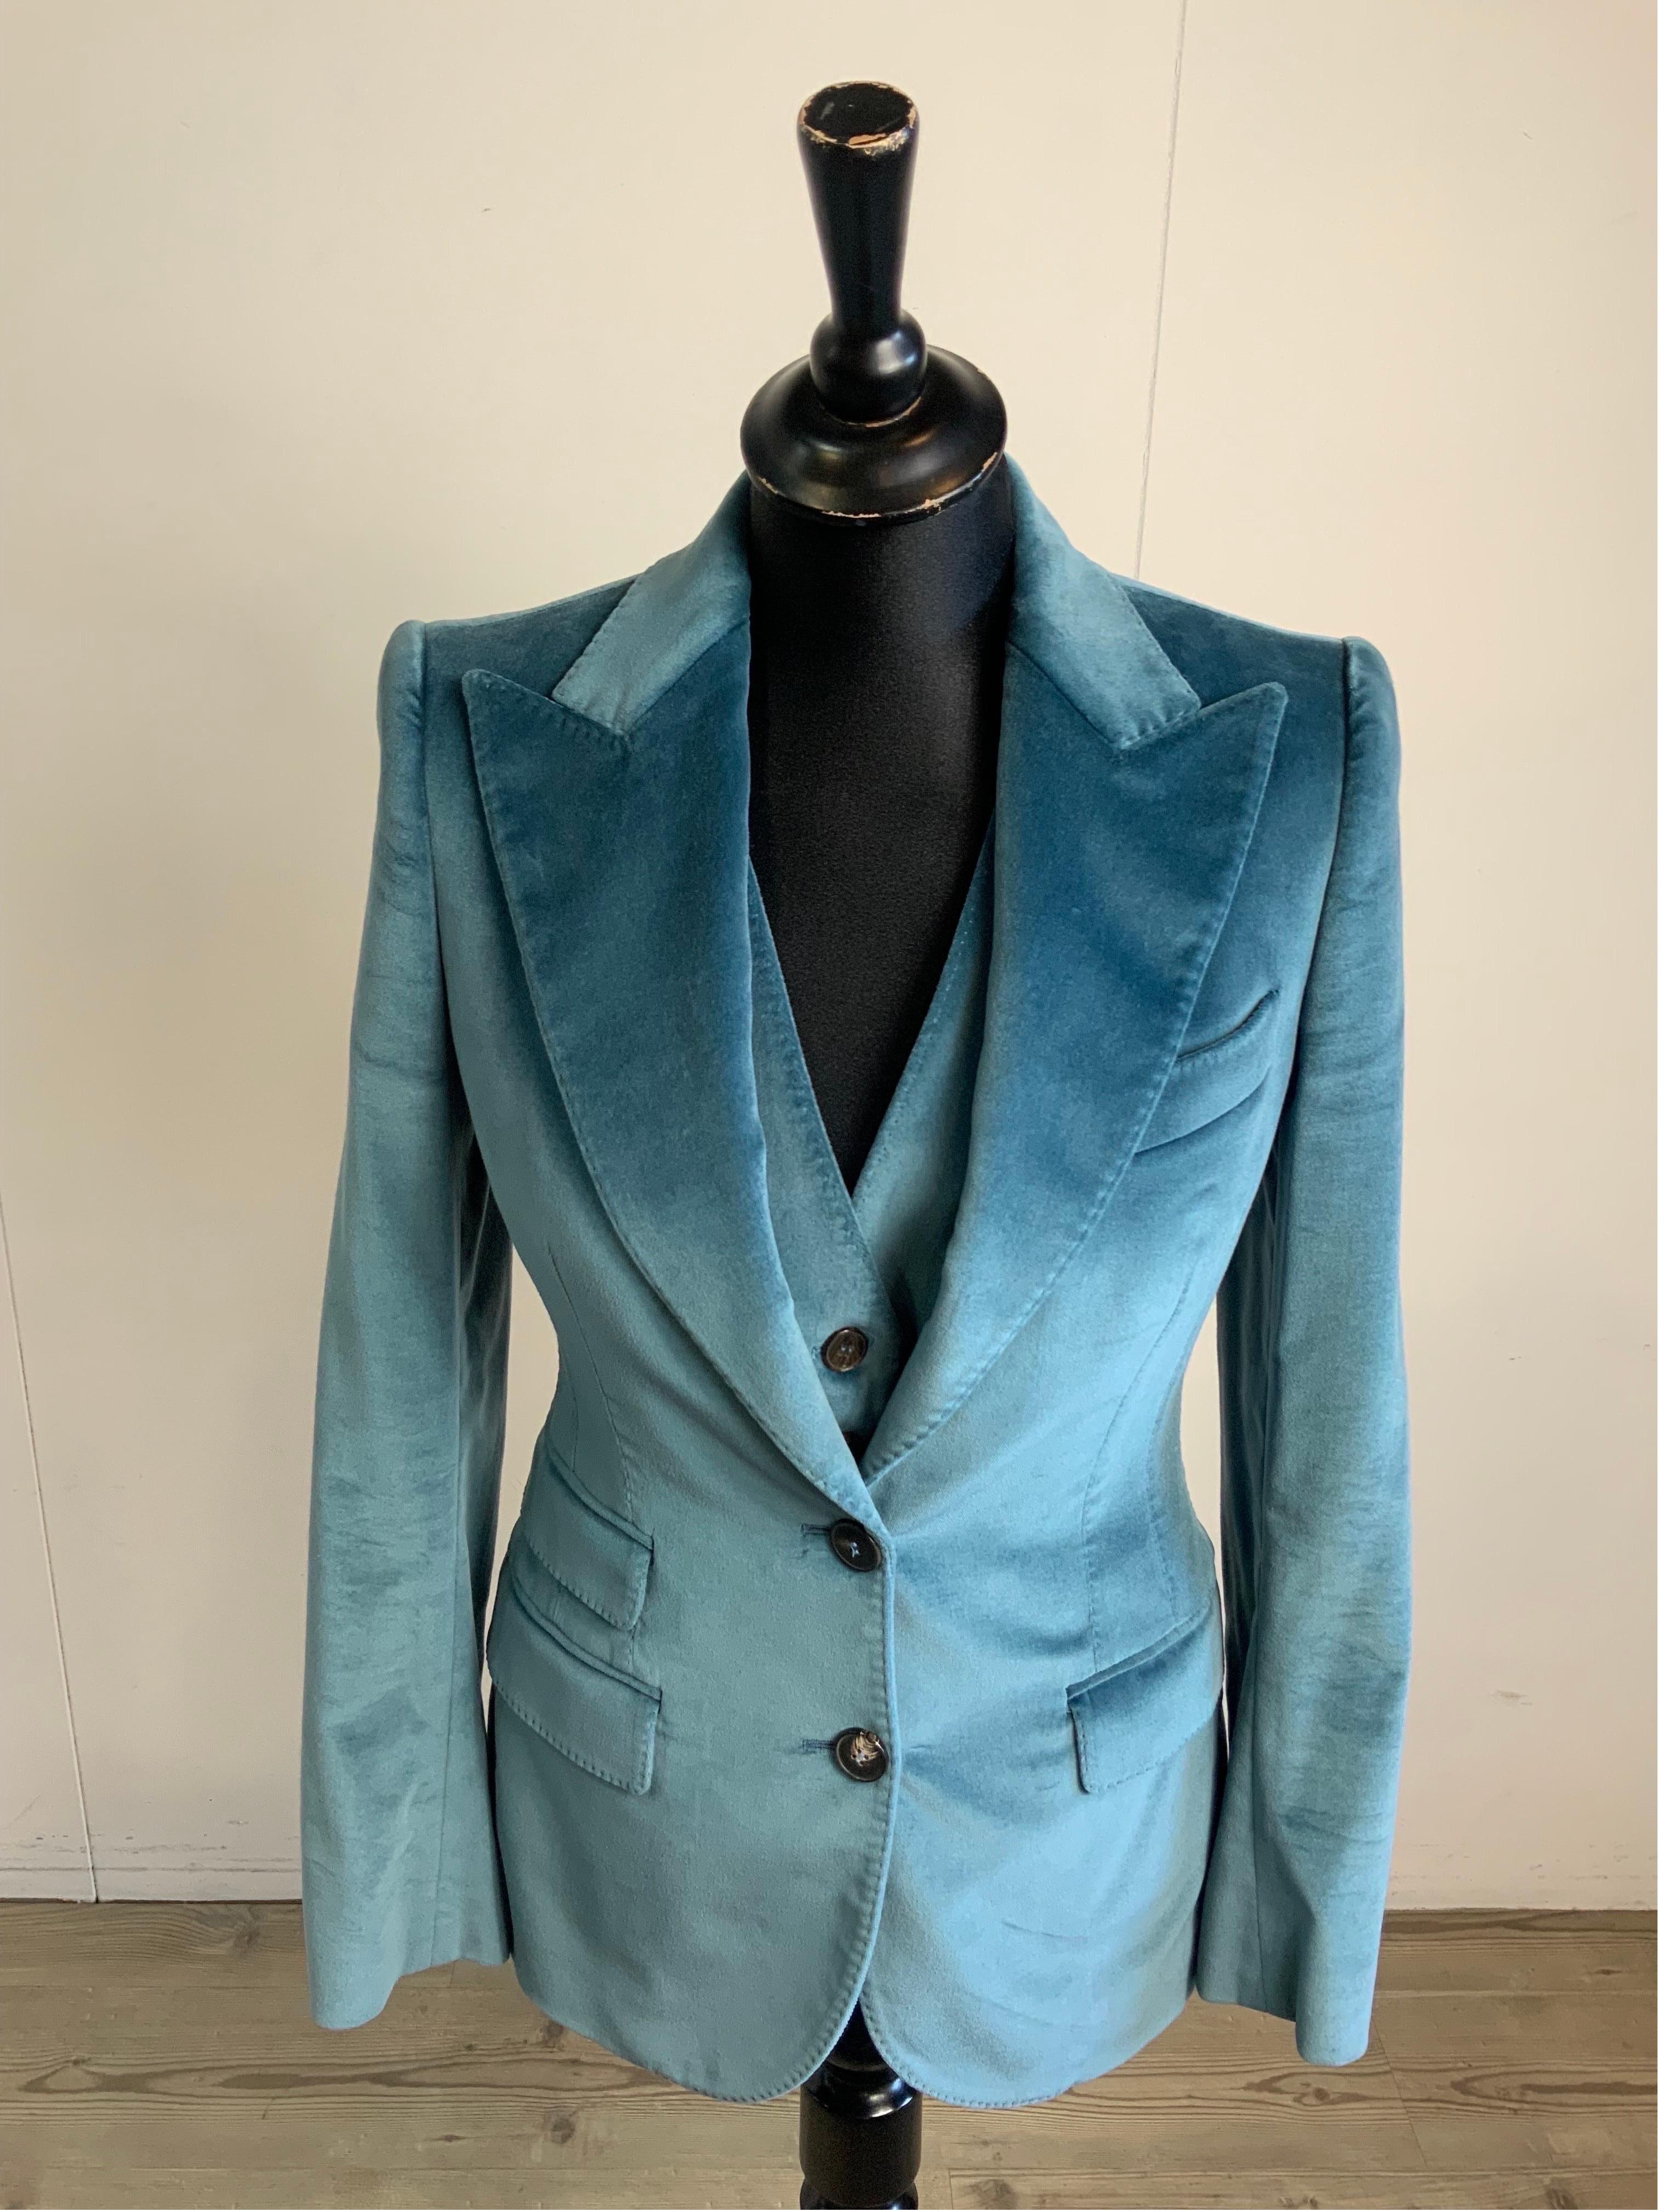 Dolce and Gabbana jacket + vest set.
in cotton, viscose and elastane. Lined. It looks like velvet.
The jacket is an Italian size 36.
Shoulders 38 cm
Bust 40 cm
Length 72 cm
Sleeve 62 cm
The vest is an Italian 40
Bust 40 cm
Length 55 cm
Excellent